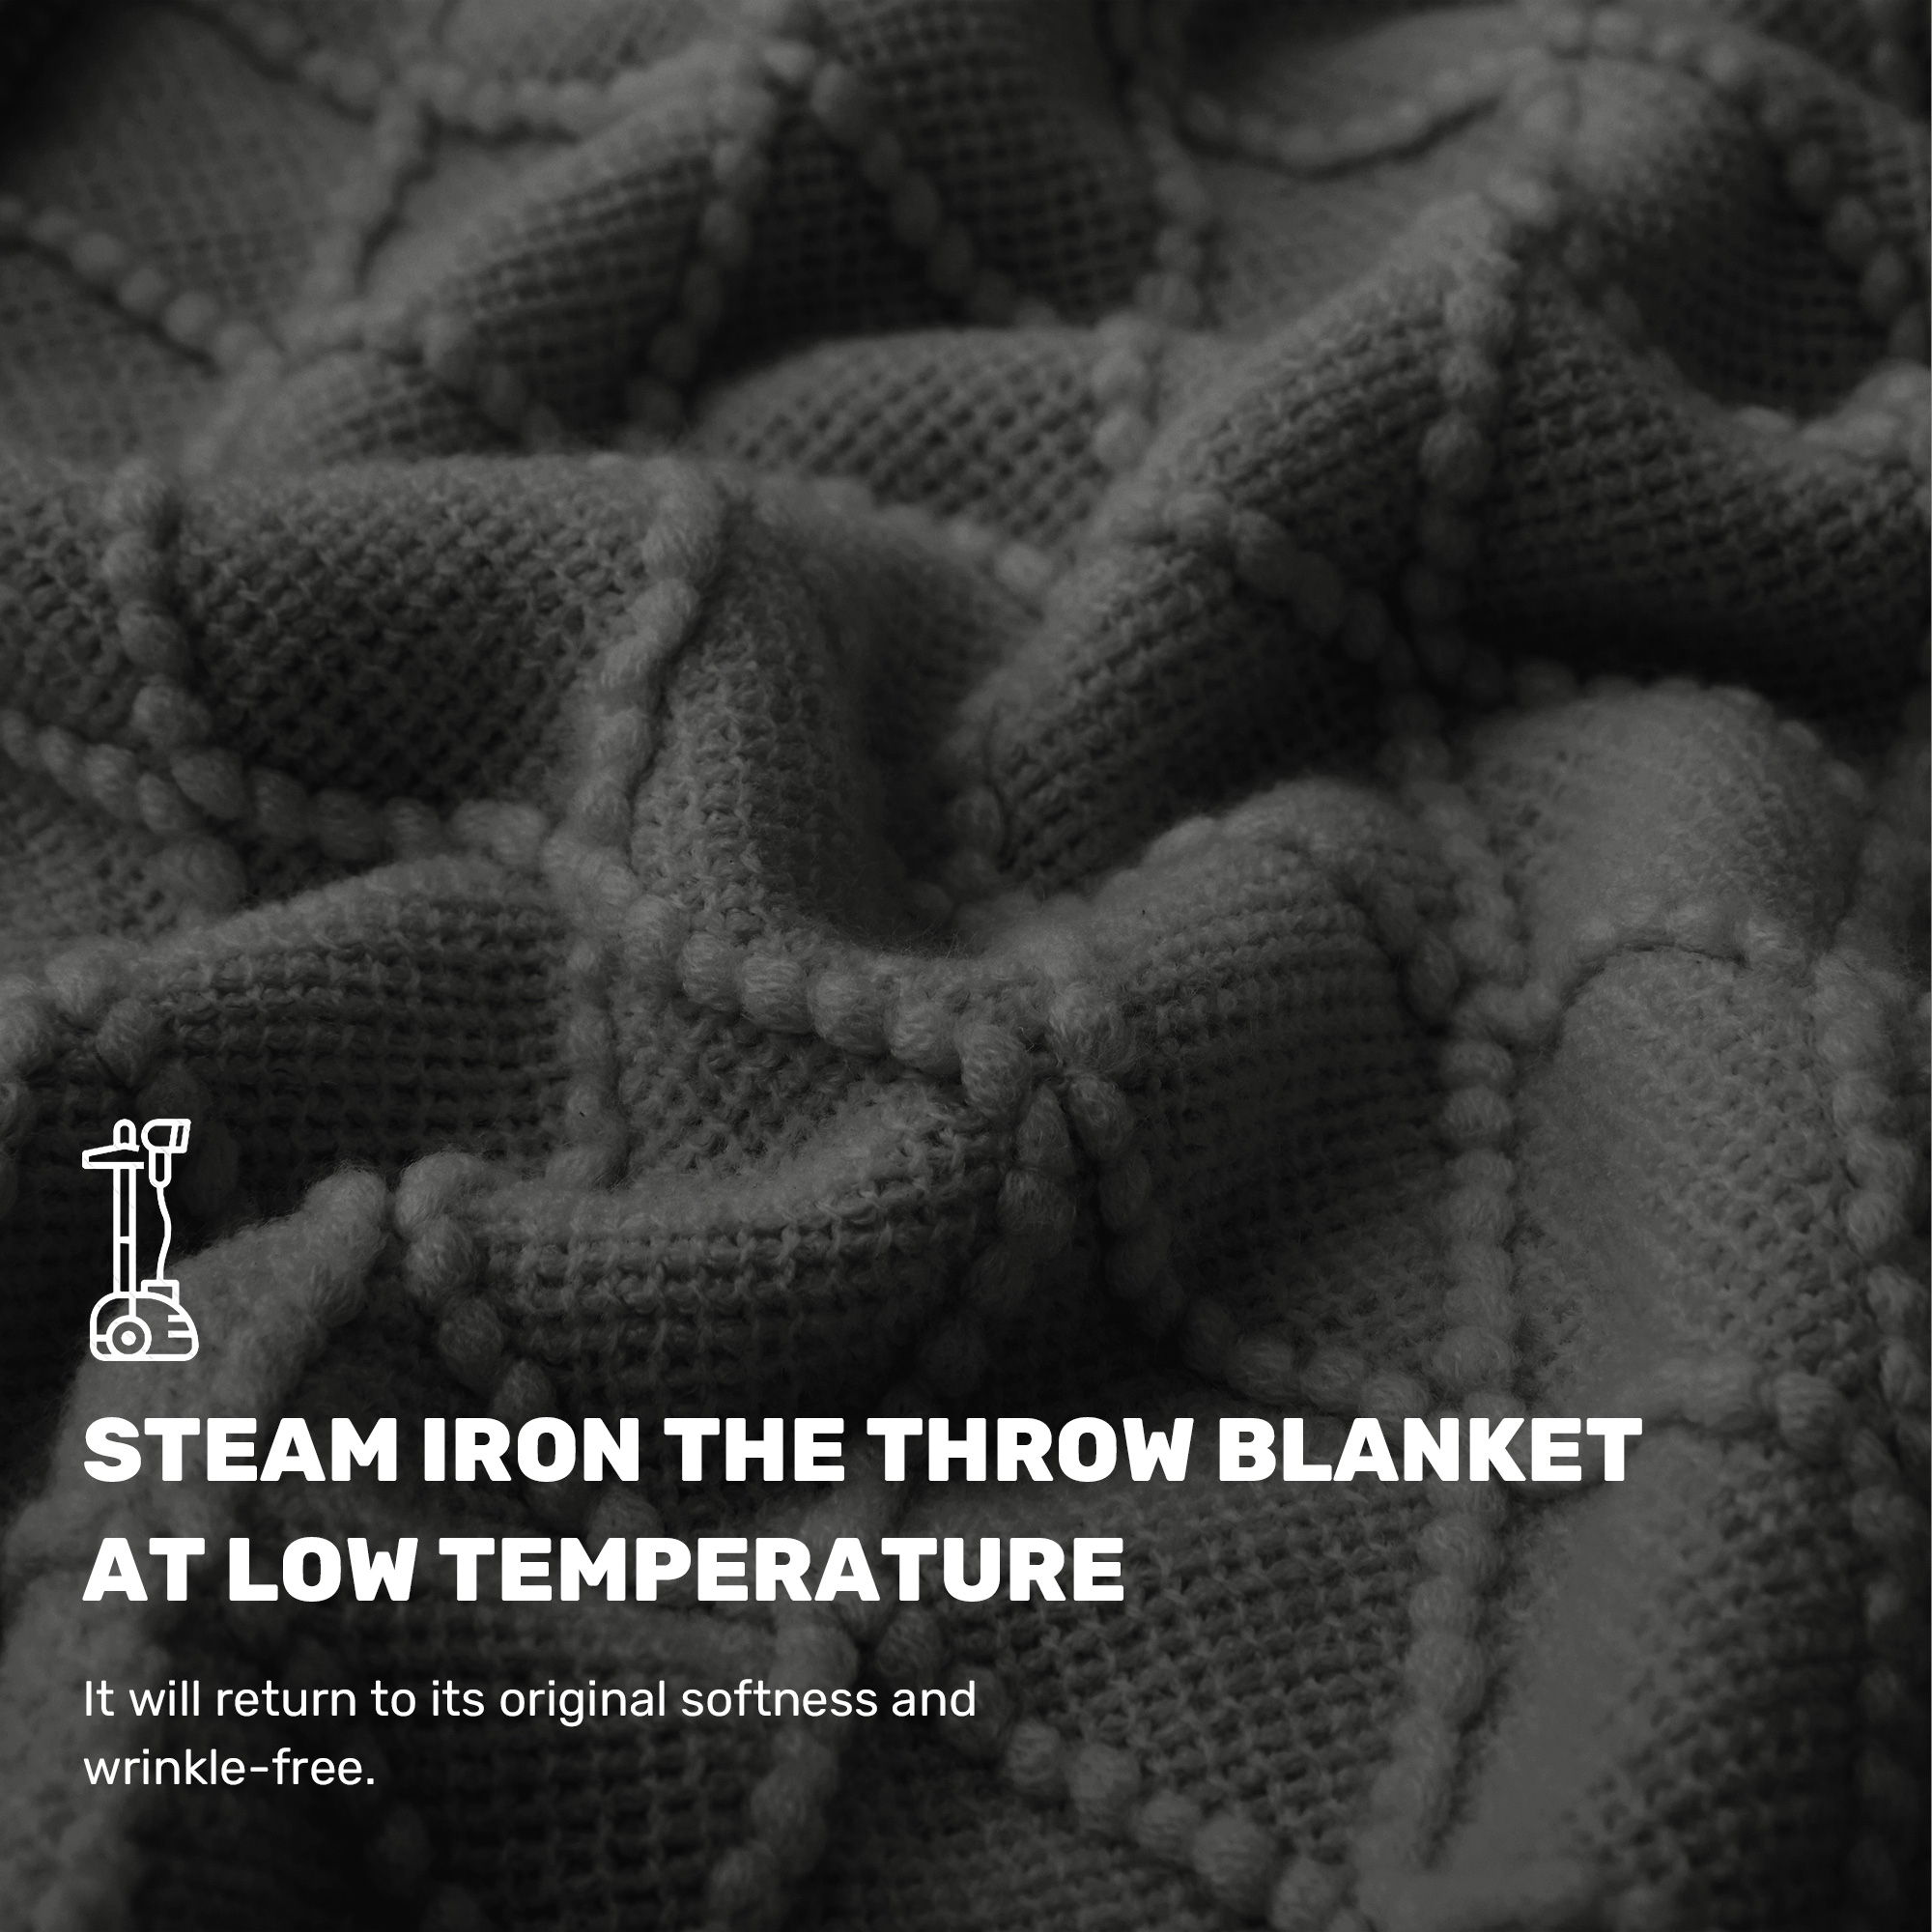 Ultra Soft Diamond Knit Throw Blanket 50x60-Perfect For Year-round Comfort - Carbon Grey, 50 In X 60 In